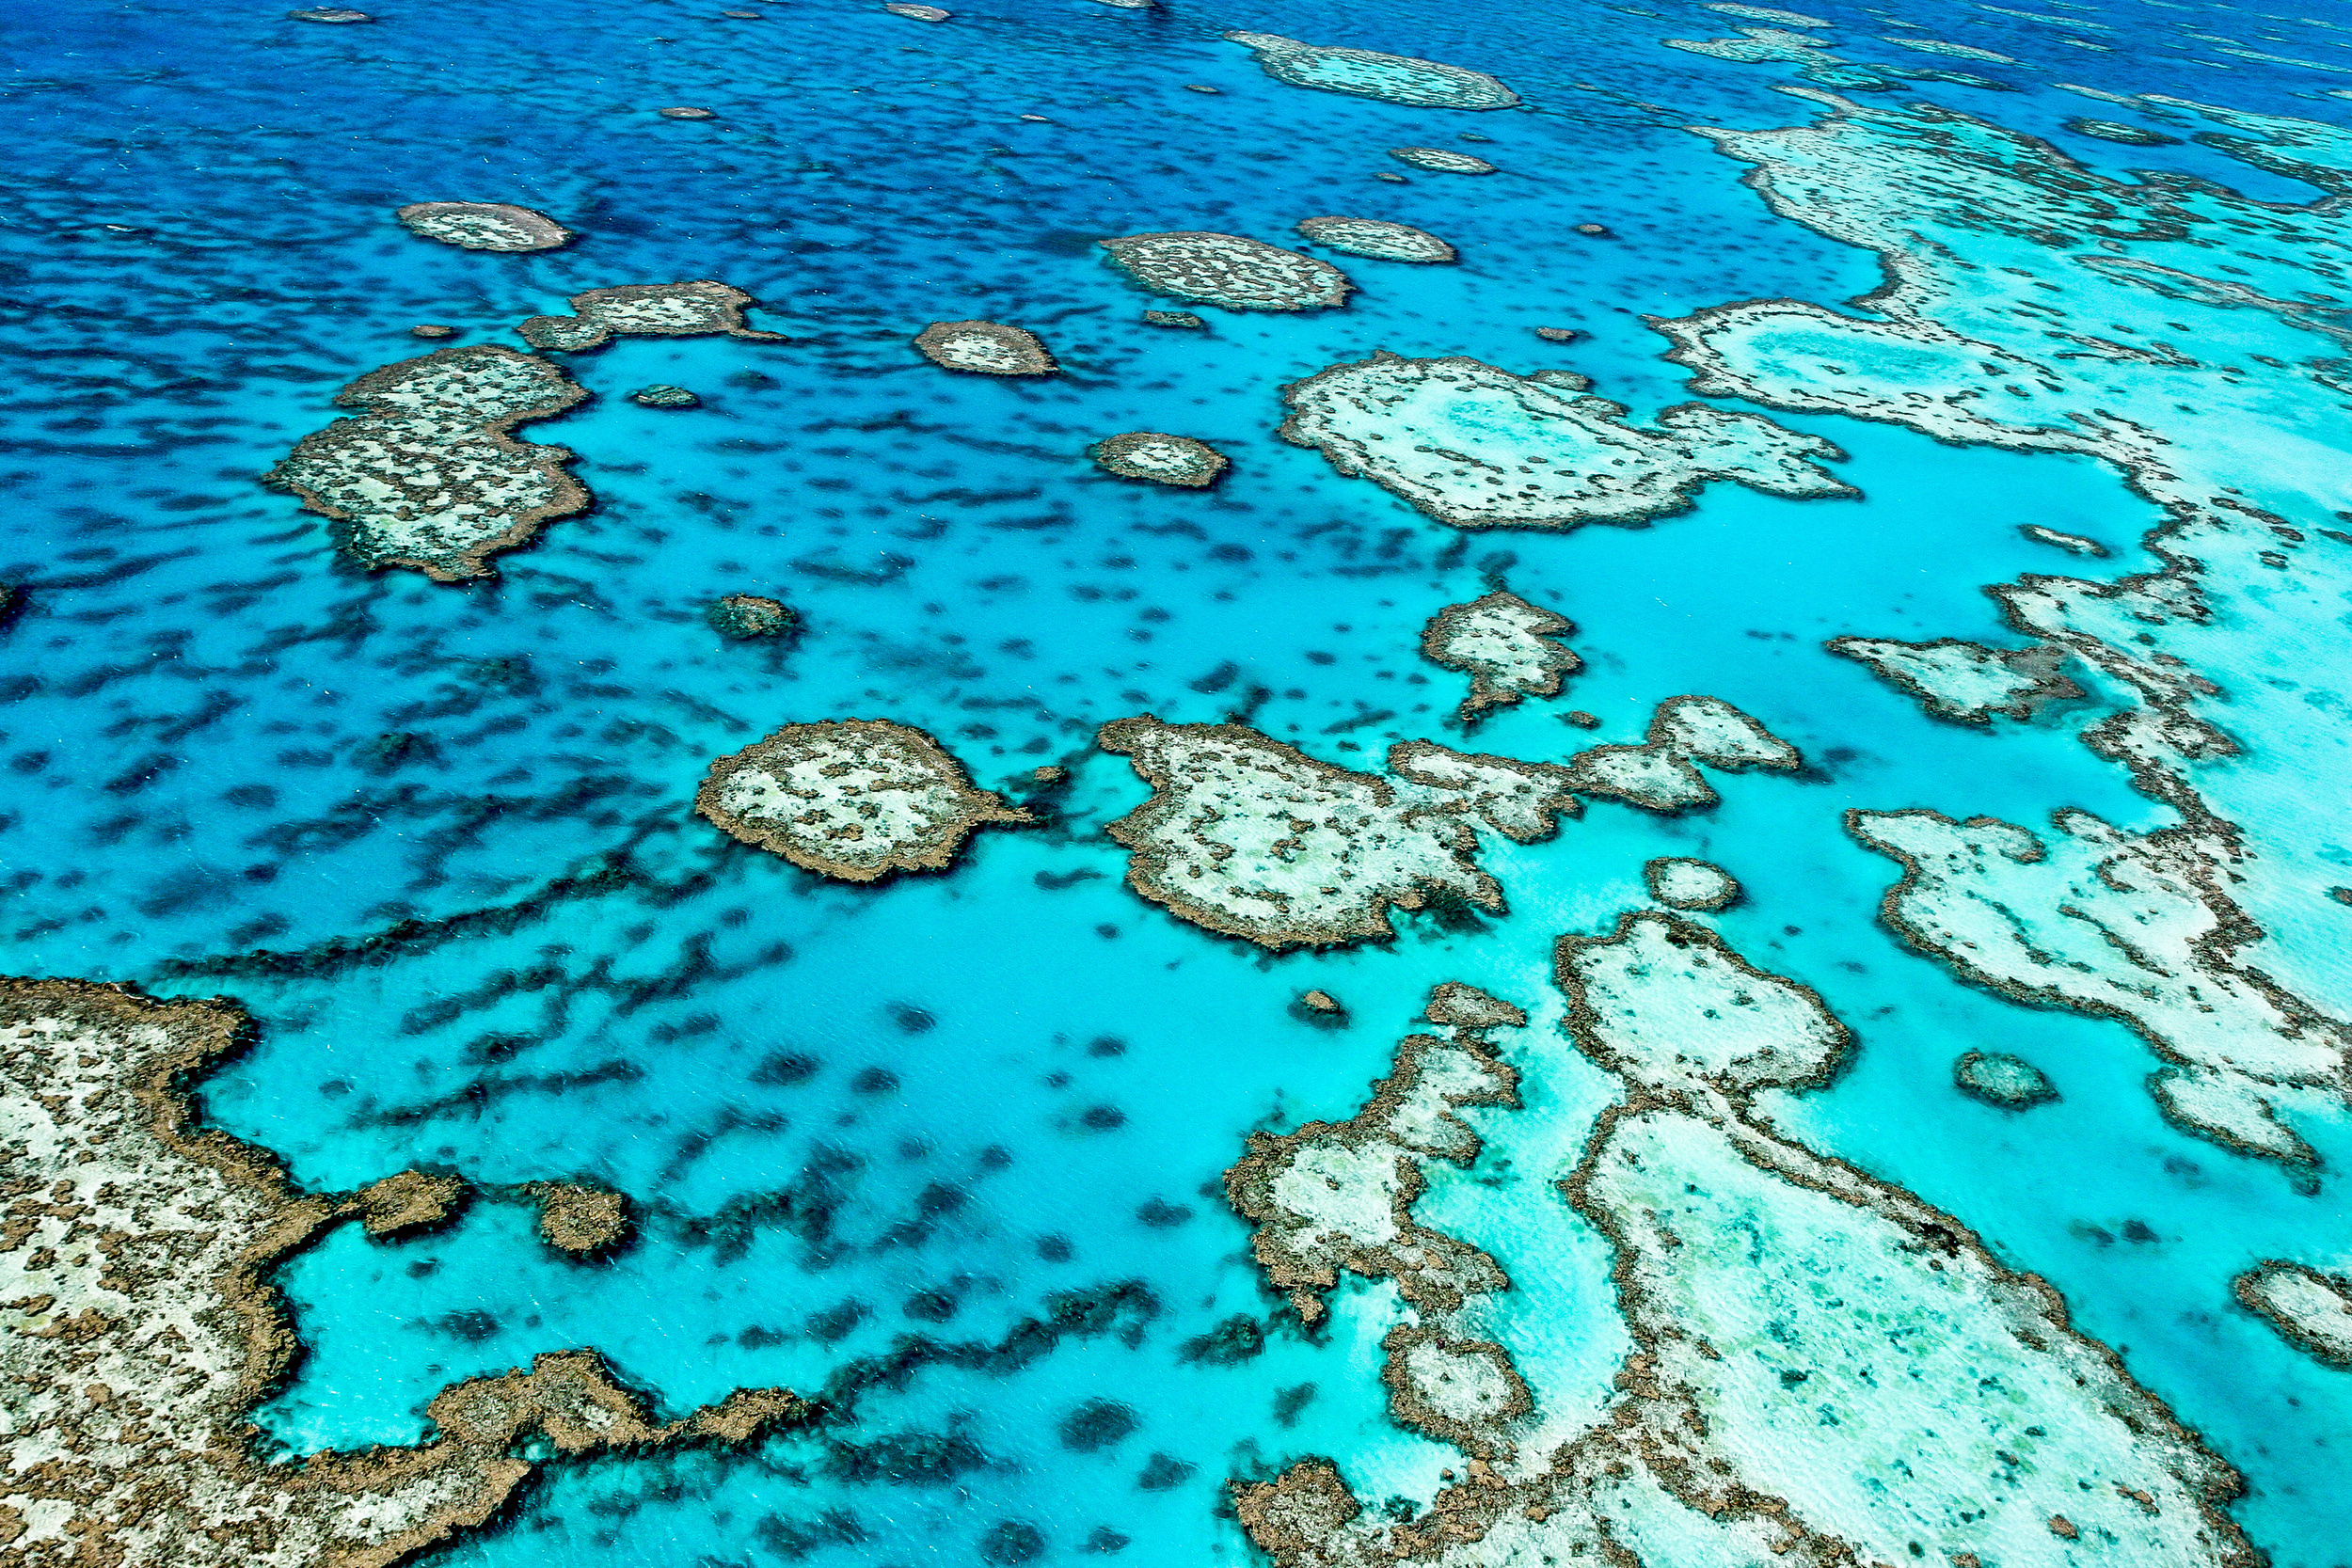 <p>One of the most famous destinations for marine life, the best part about the Great Barrier Reef is the coral. Brilliant rainbow colors make it a top-notch diving and snorkeling location. And you’re likely to see tropical fish, sharks, and sea turtles.</p><p><a href='https://www.msn.com/en-us/community/channel/vid-cj9pqbr0vn9in2b6ddcd8sfgpfq6x6utp44fssrv6mc2gtybw0us'>Follow us on MSN to see more of our exclusive lifestyle content.</a></p>